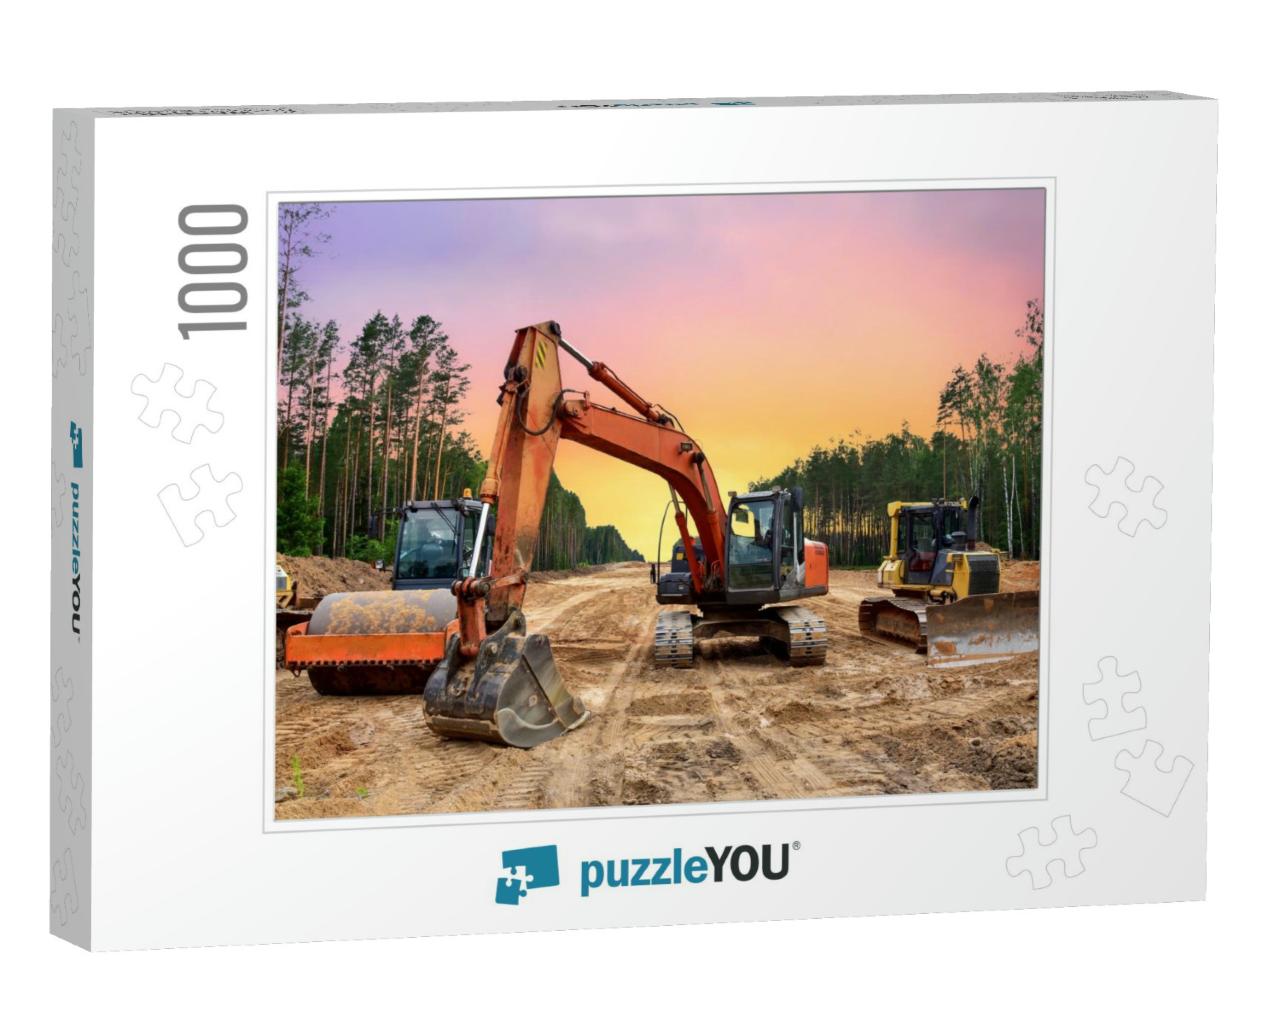 Bulldozer, Excavator & Soil Compactor on Road Work. Earth... Jigsaw Puzzle with 1000 pieces